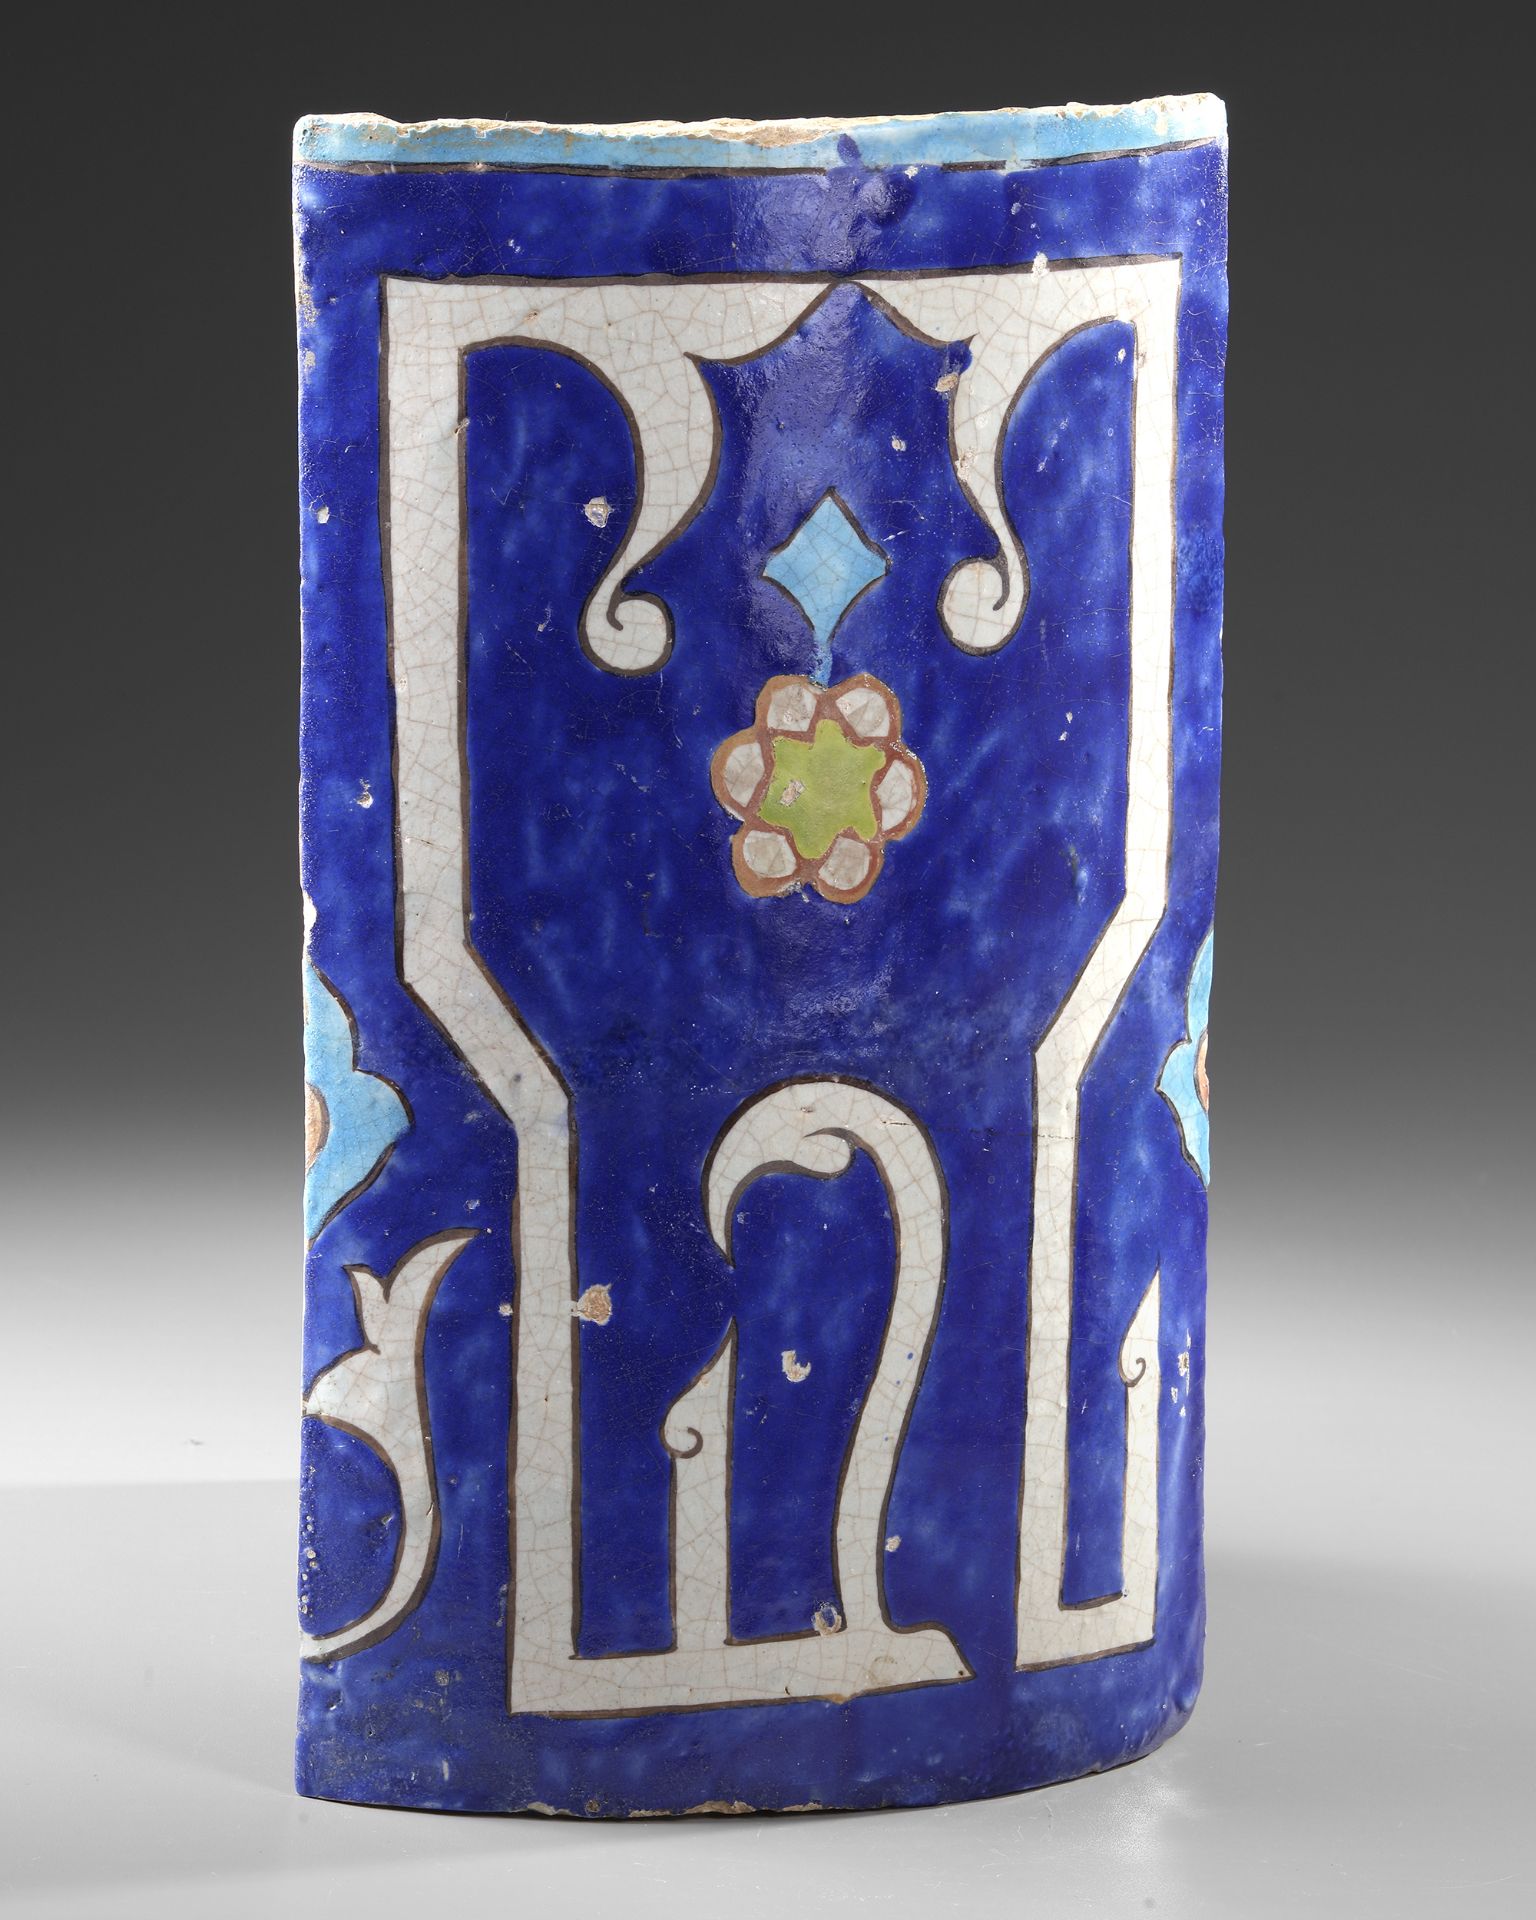 A TIMURID CALLIGRAPHIC POTTERY TILE, CENTRAL ASIA OR EASTERN PERSIA, 14TH-15TH CENTURY - Bild 6 aus 10